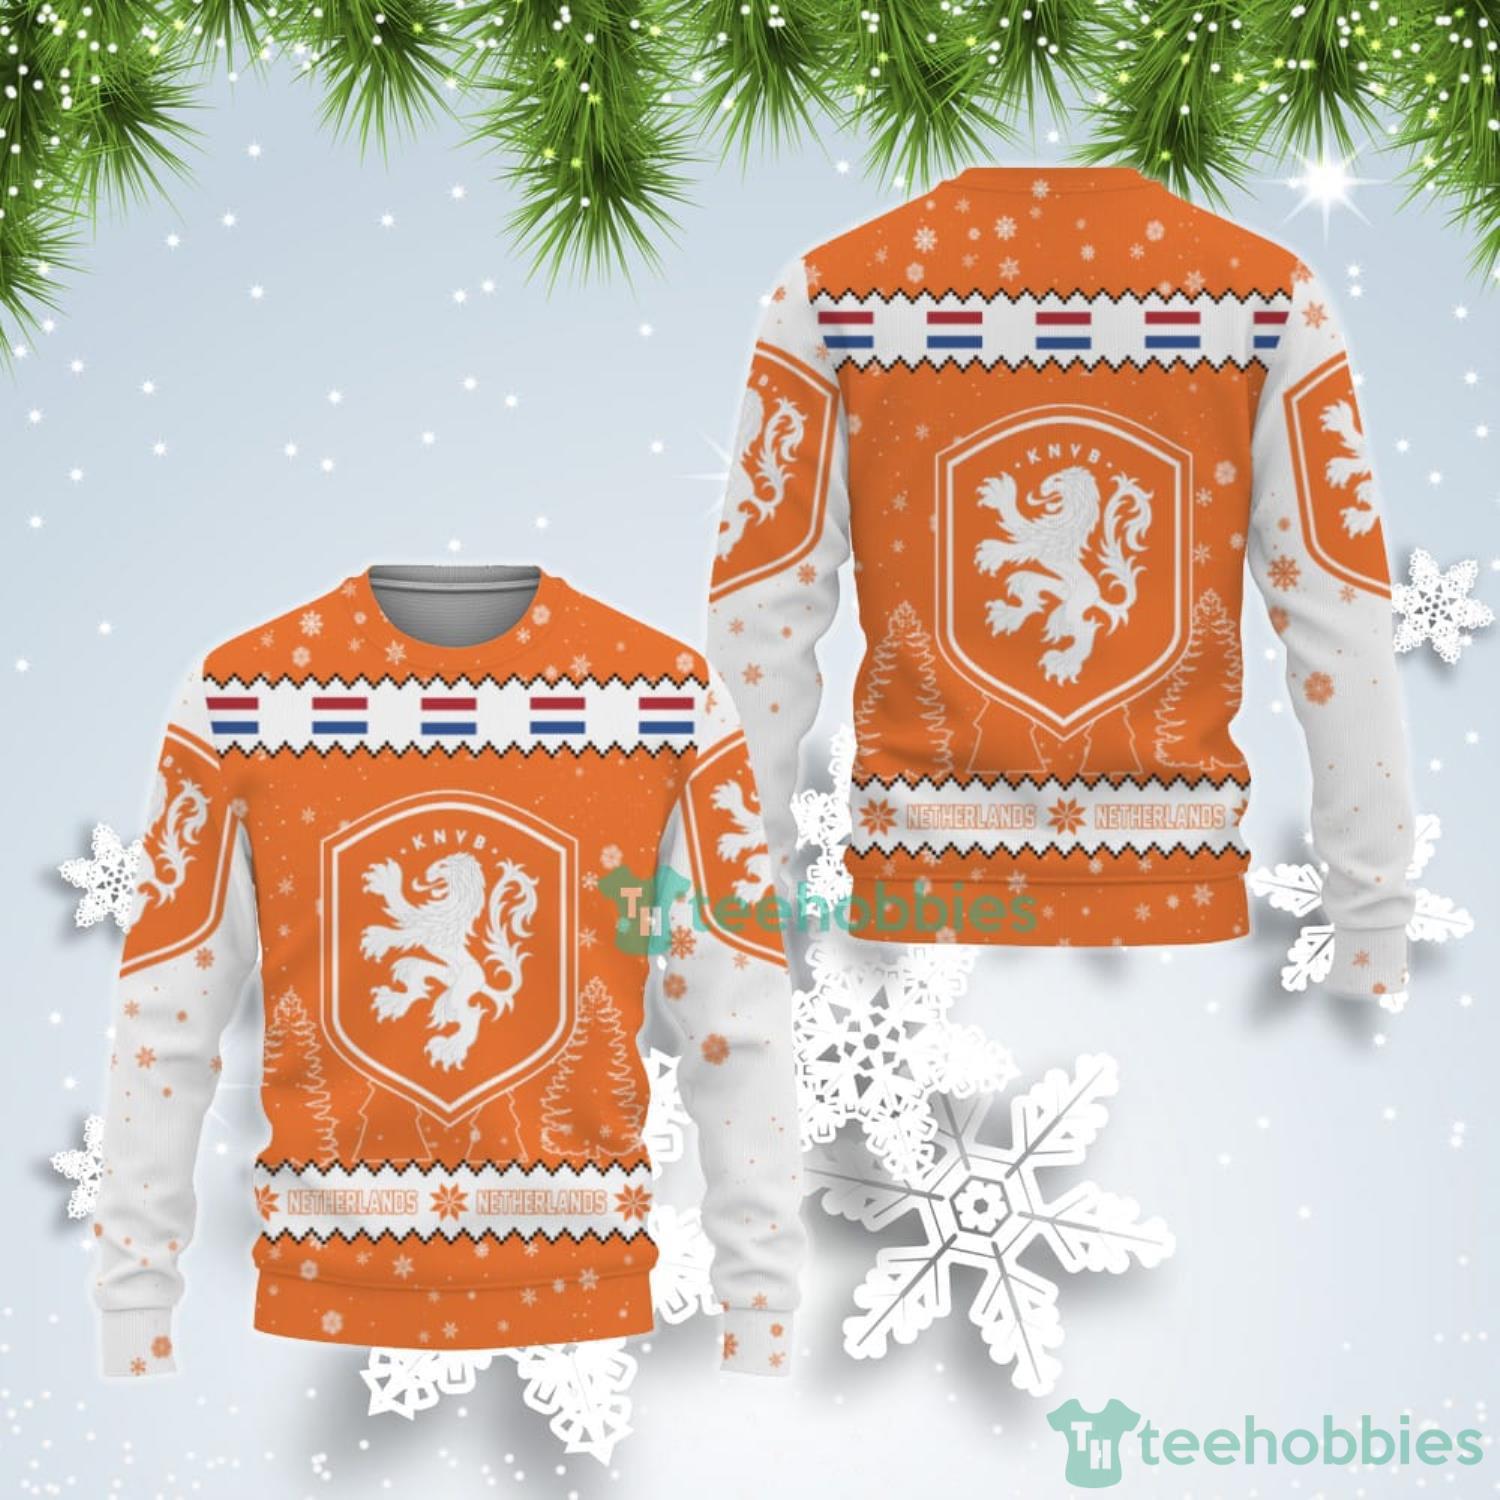 Netherlands National Soccer Team Qatar World Cup 2022 Winter Season Ugly Christmas Sweater Product Photo 1